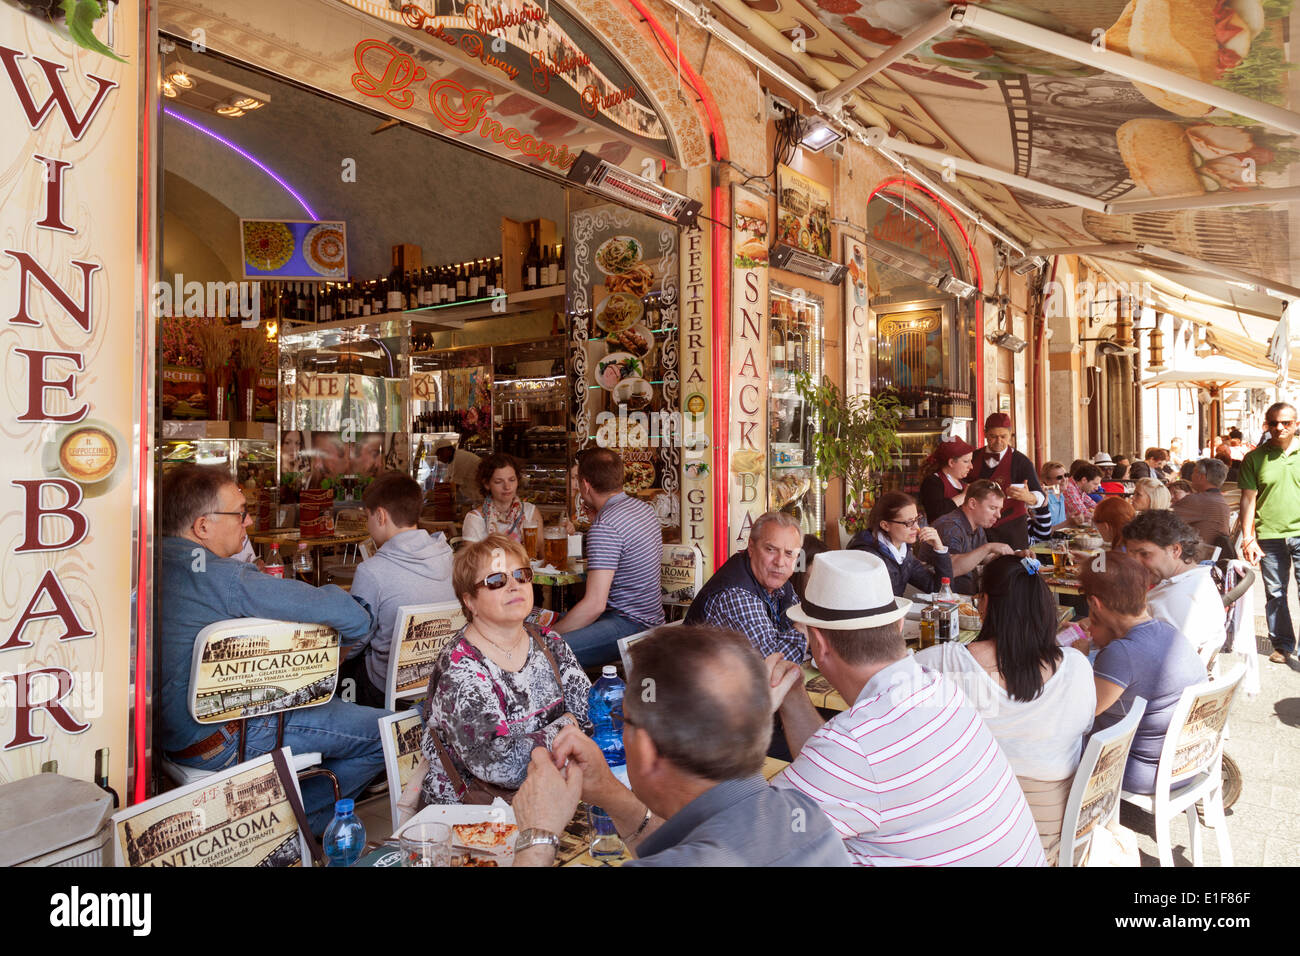 People eating and drinking at a street cafe in Rome, Italy Europe Stock Photo